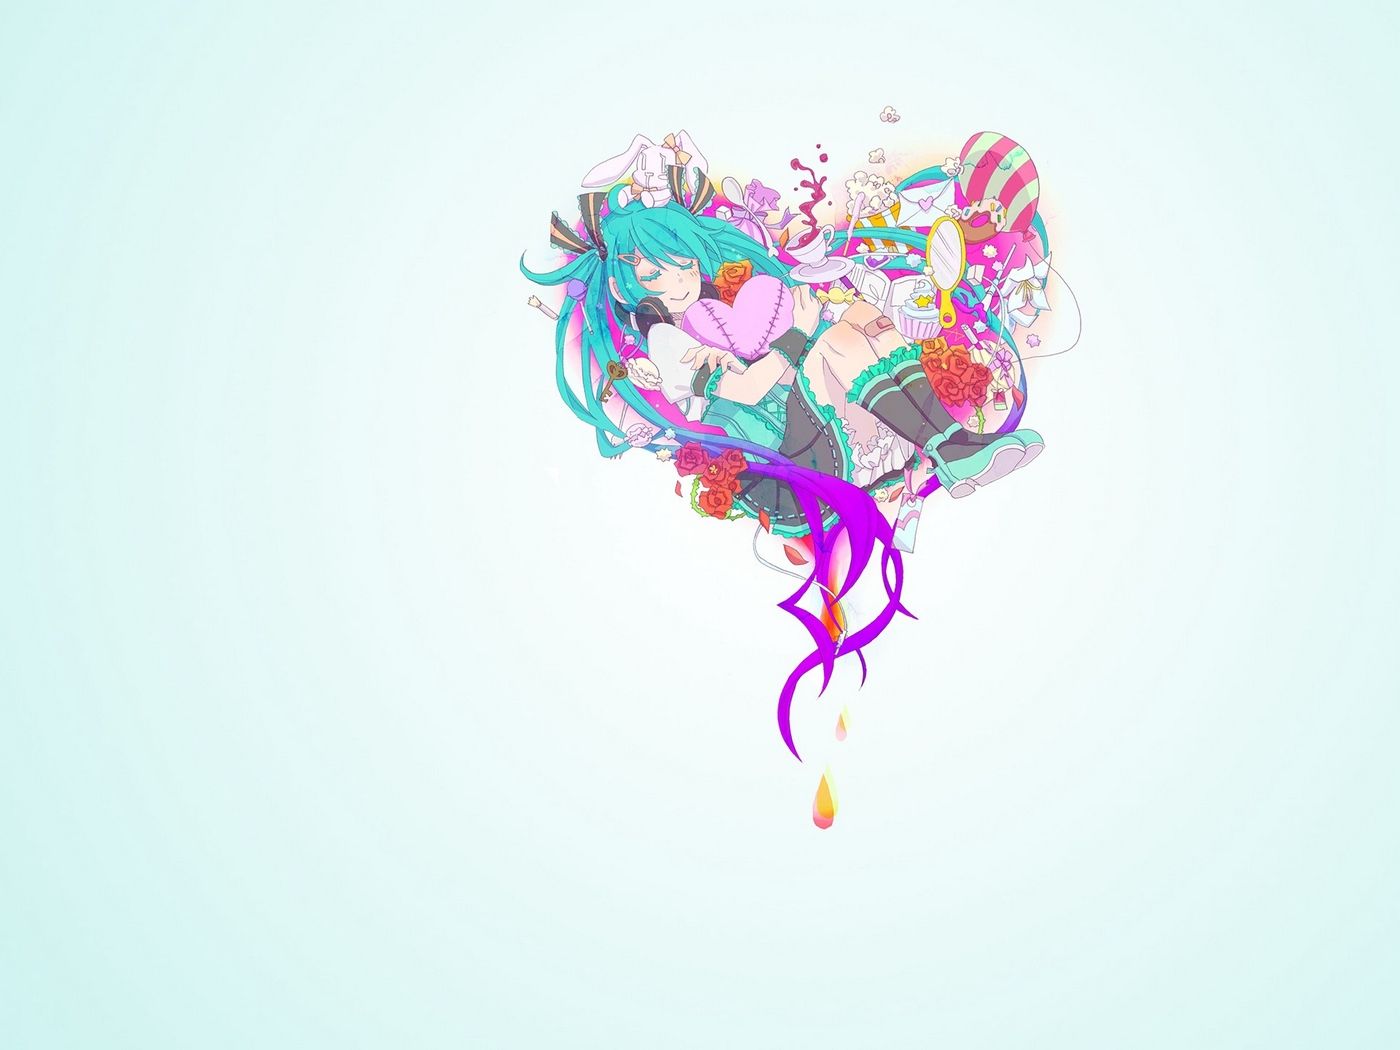 Download wallpaper 1400x1050 anime, girl, heart, colorful standard